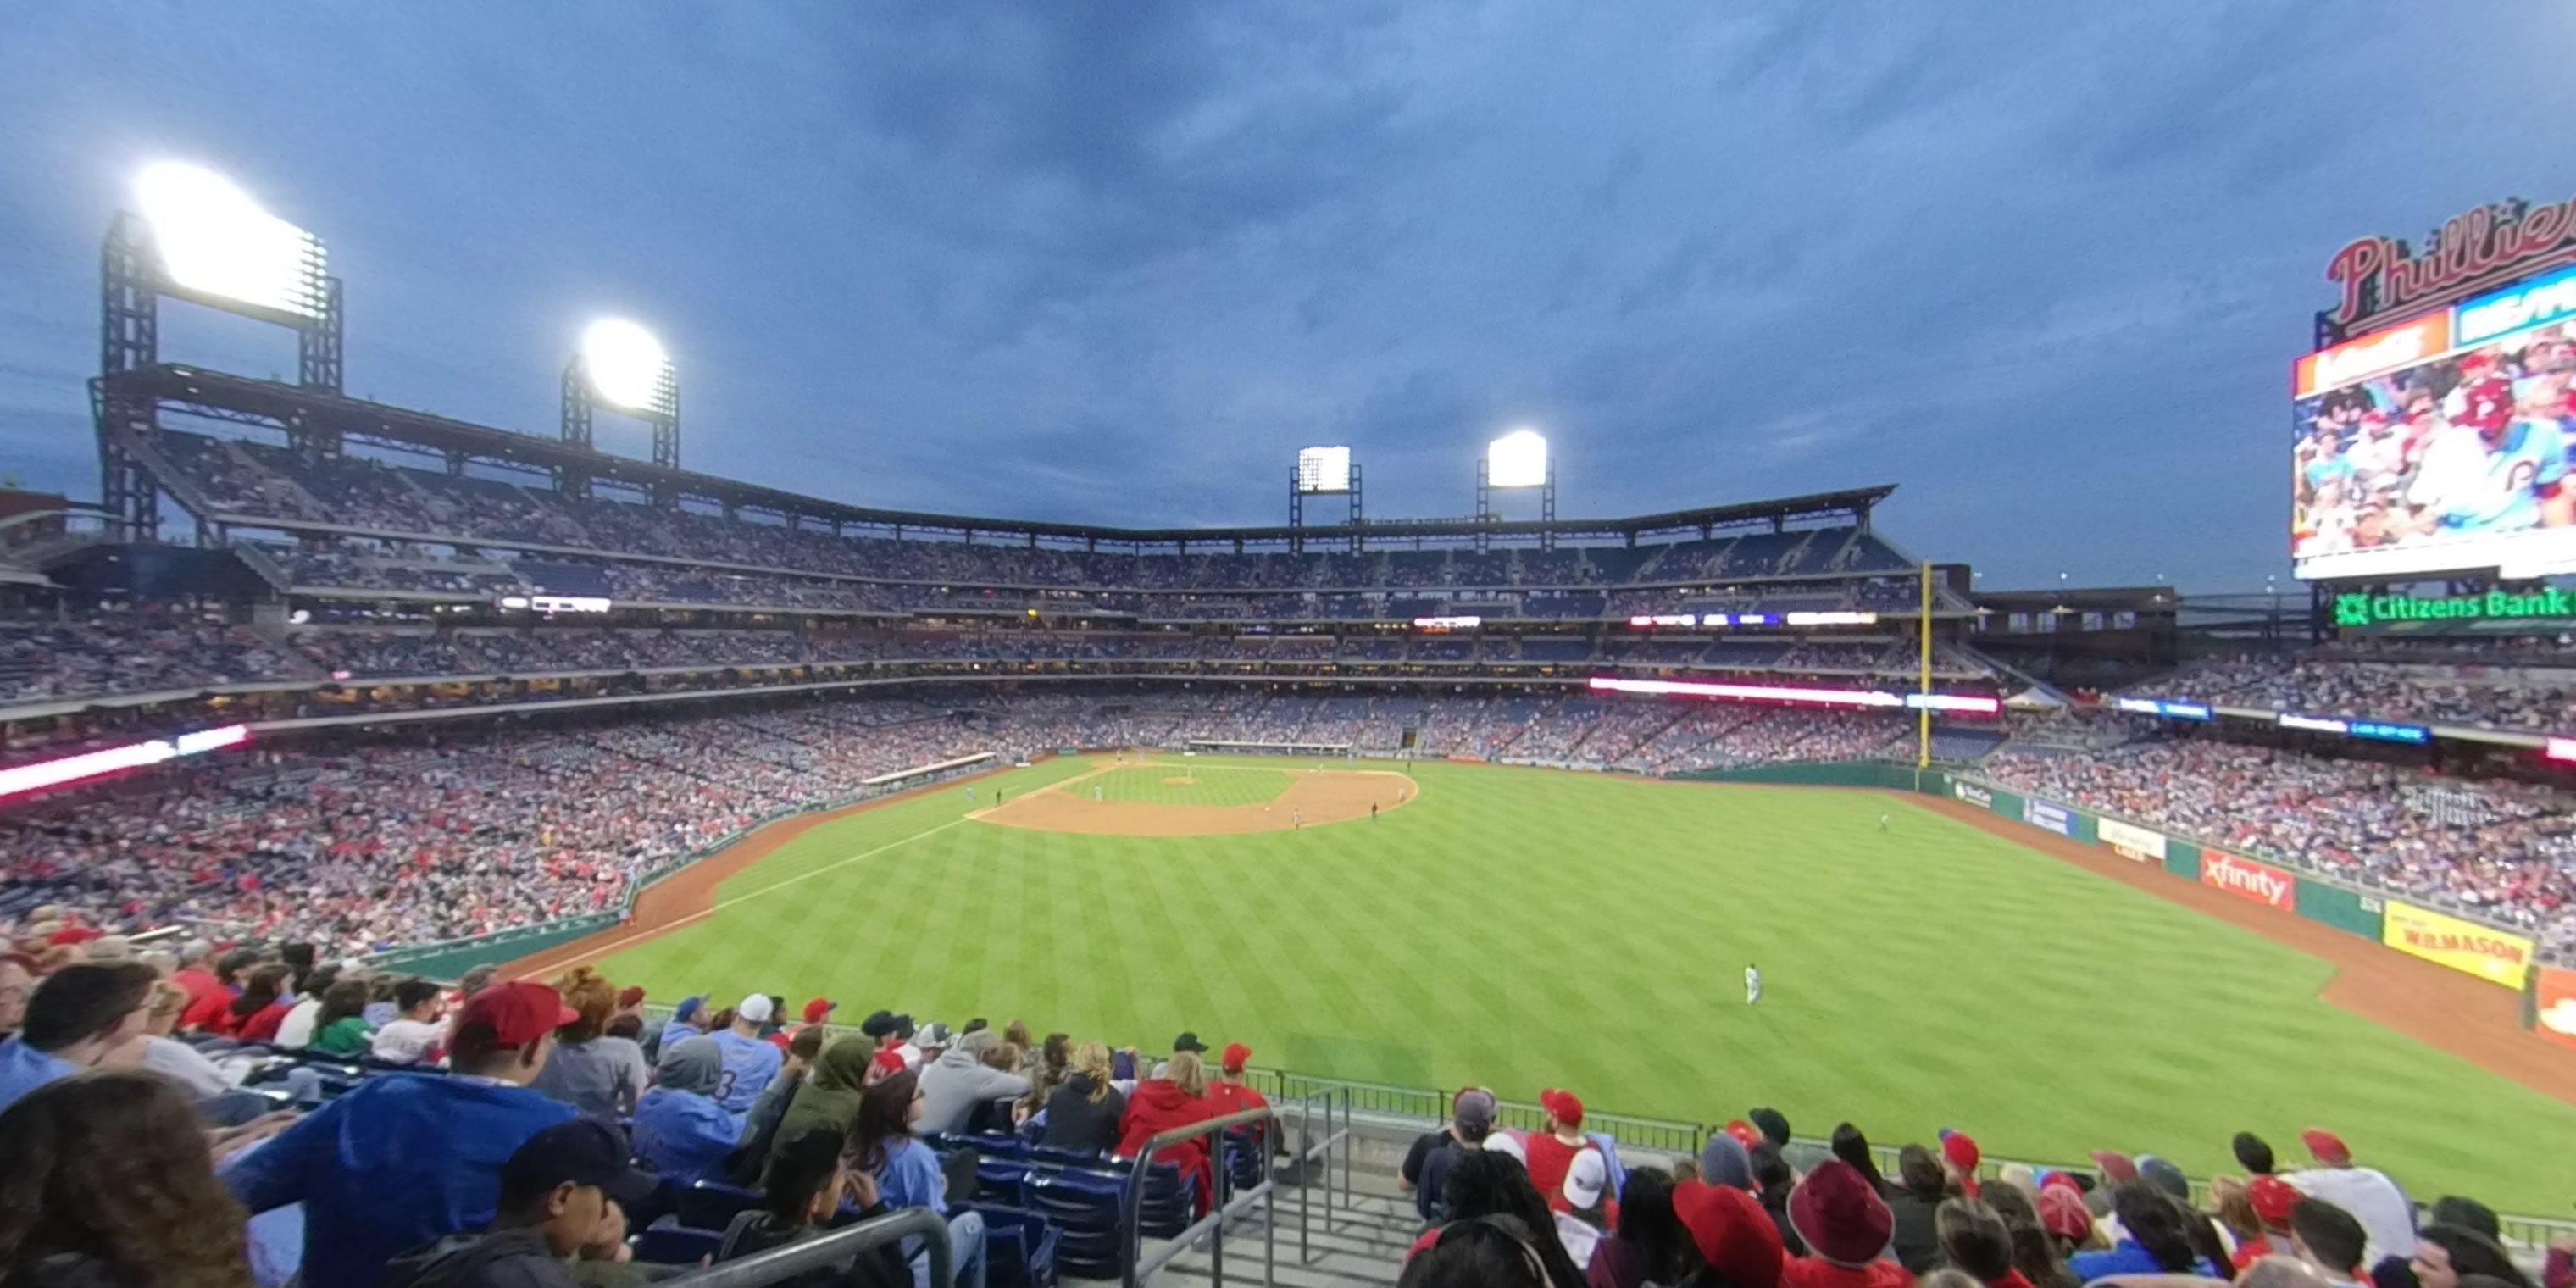 section 201 panoramic seat view  for baseball - citizens bank park